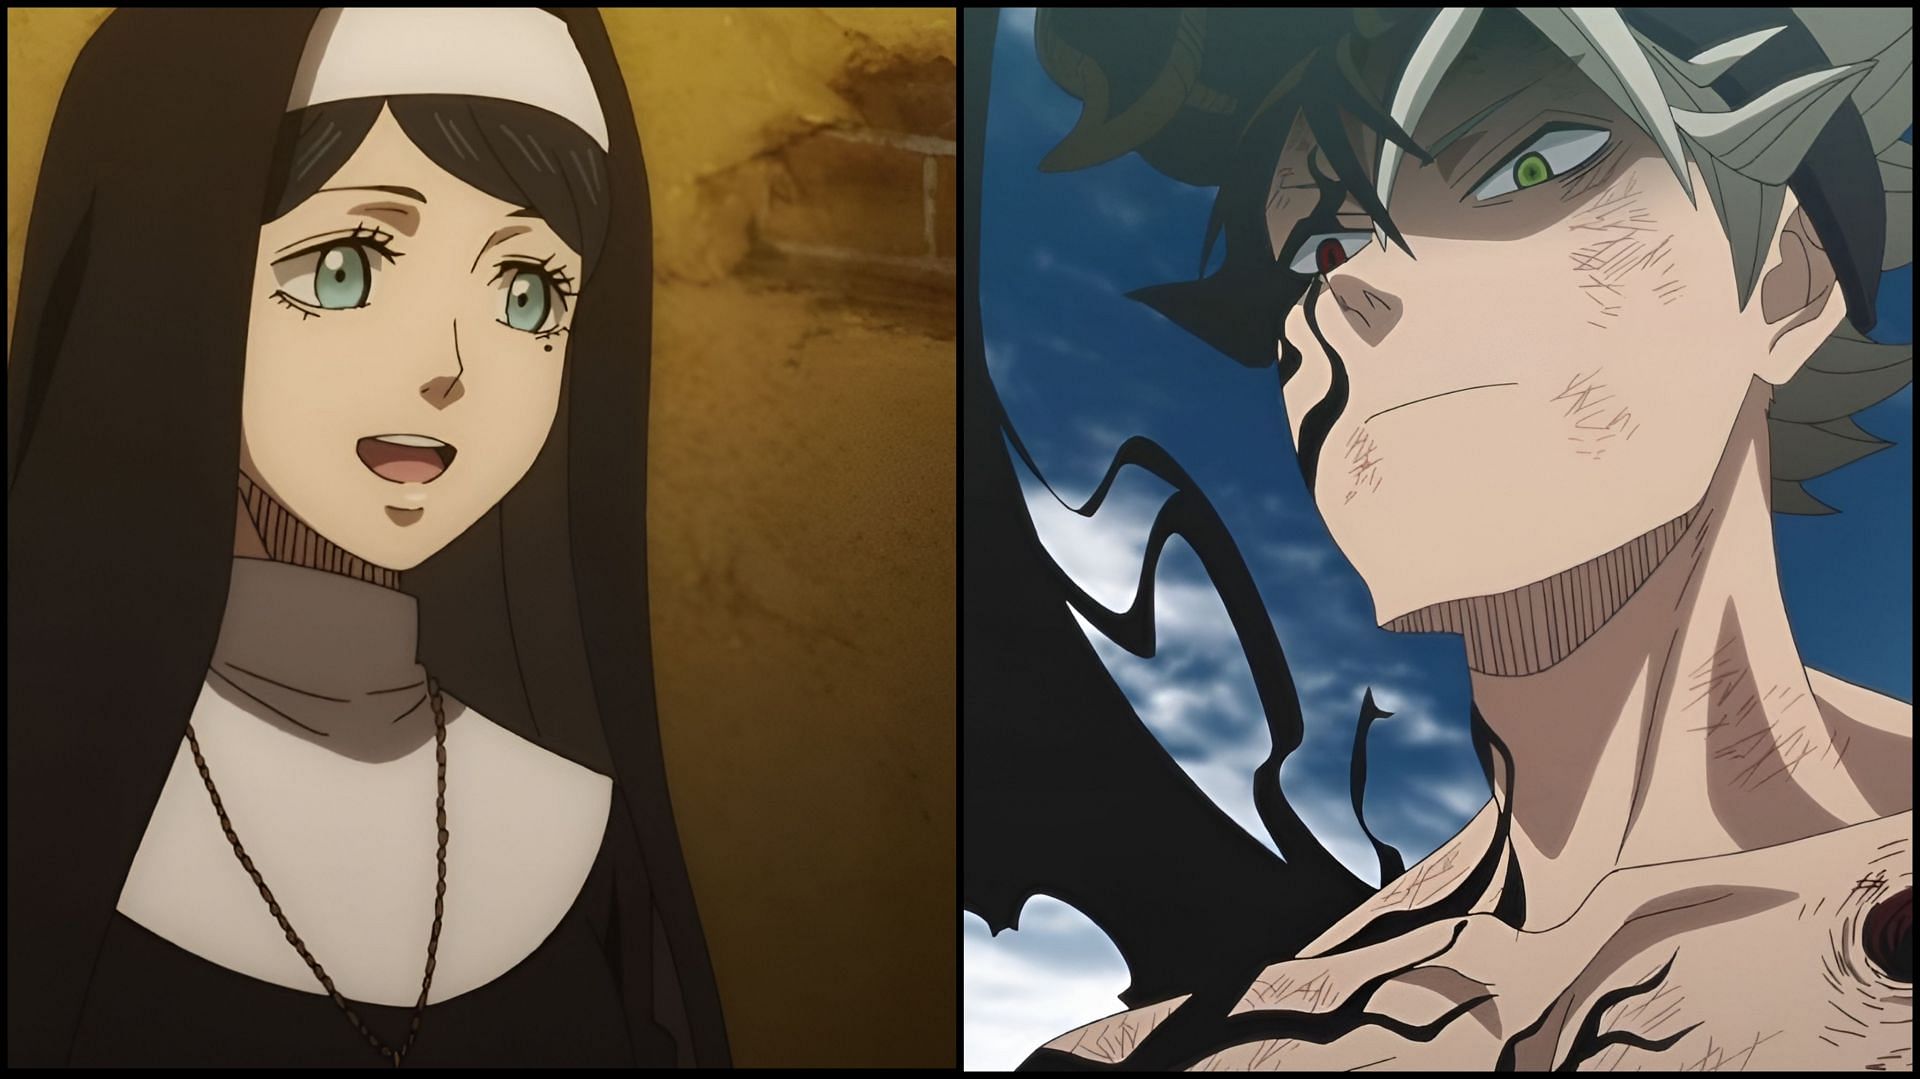 Black Clover chapter 334 (initial spoilers): Cryptic hints regarding Sister  Lily comes true